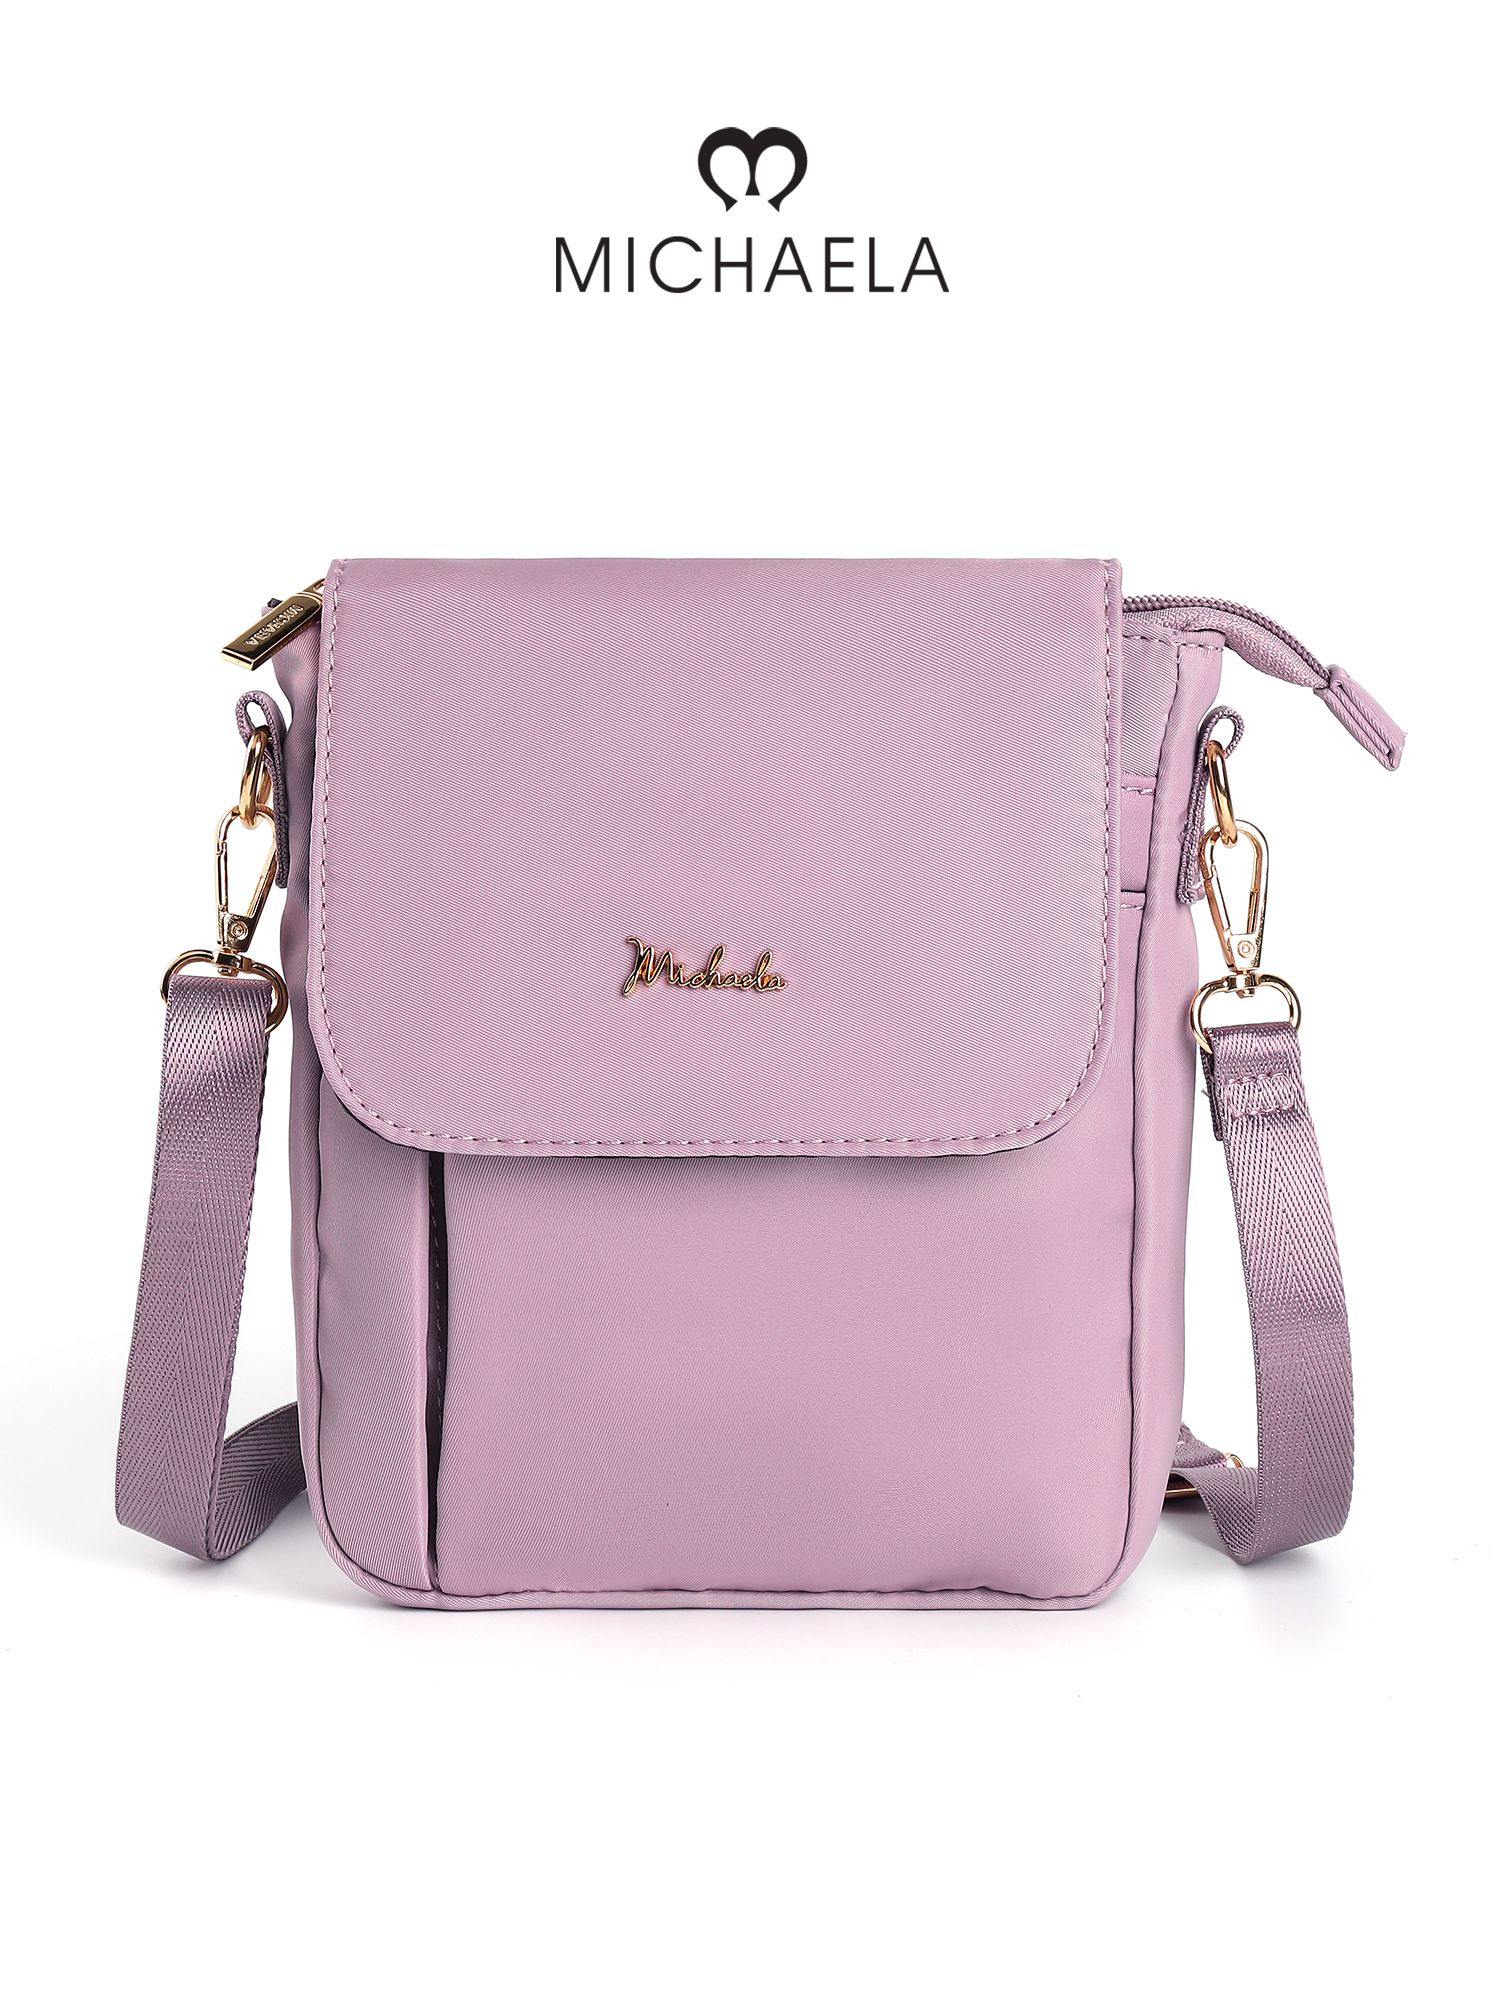 Mkf Collection Michaela Women's Shoulder Bag by Mia K | CoolSprings Galleria